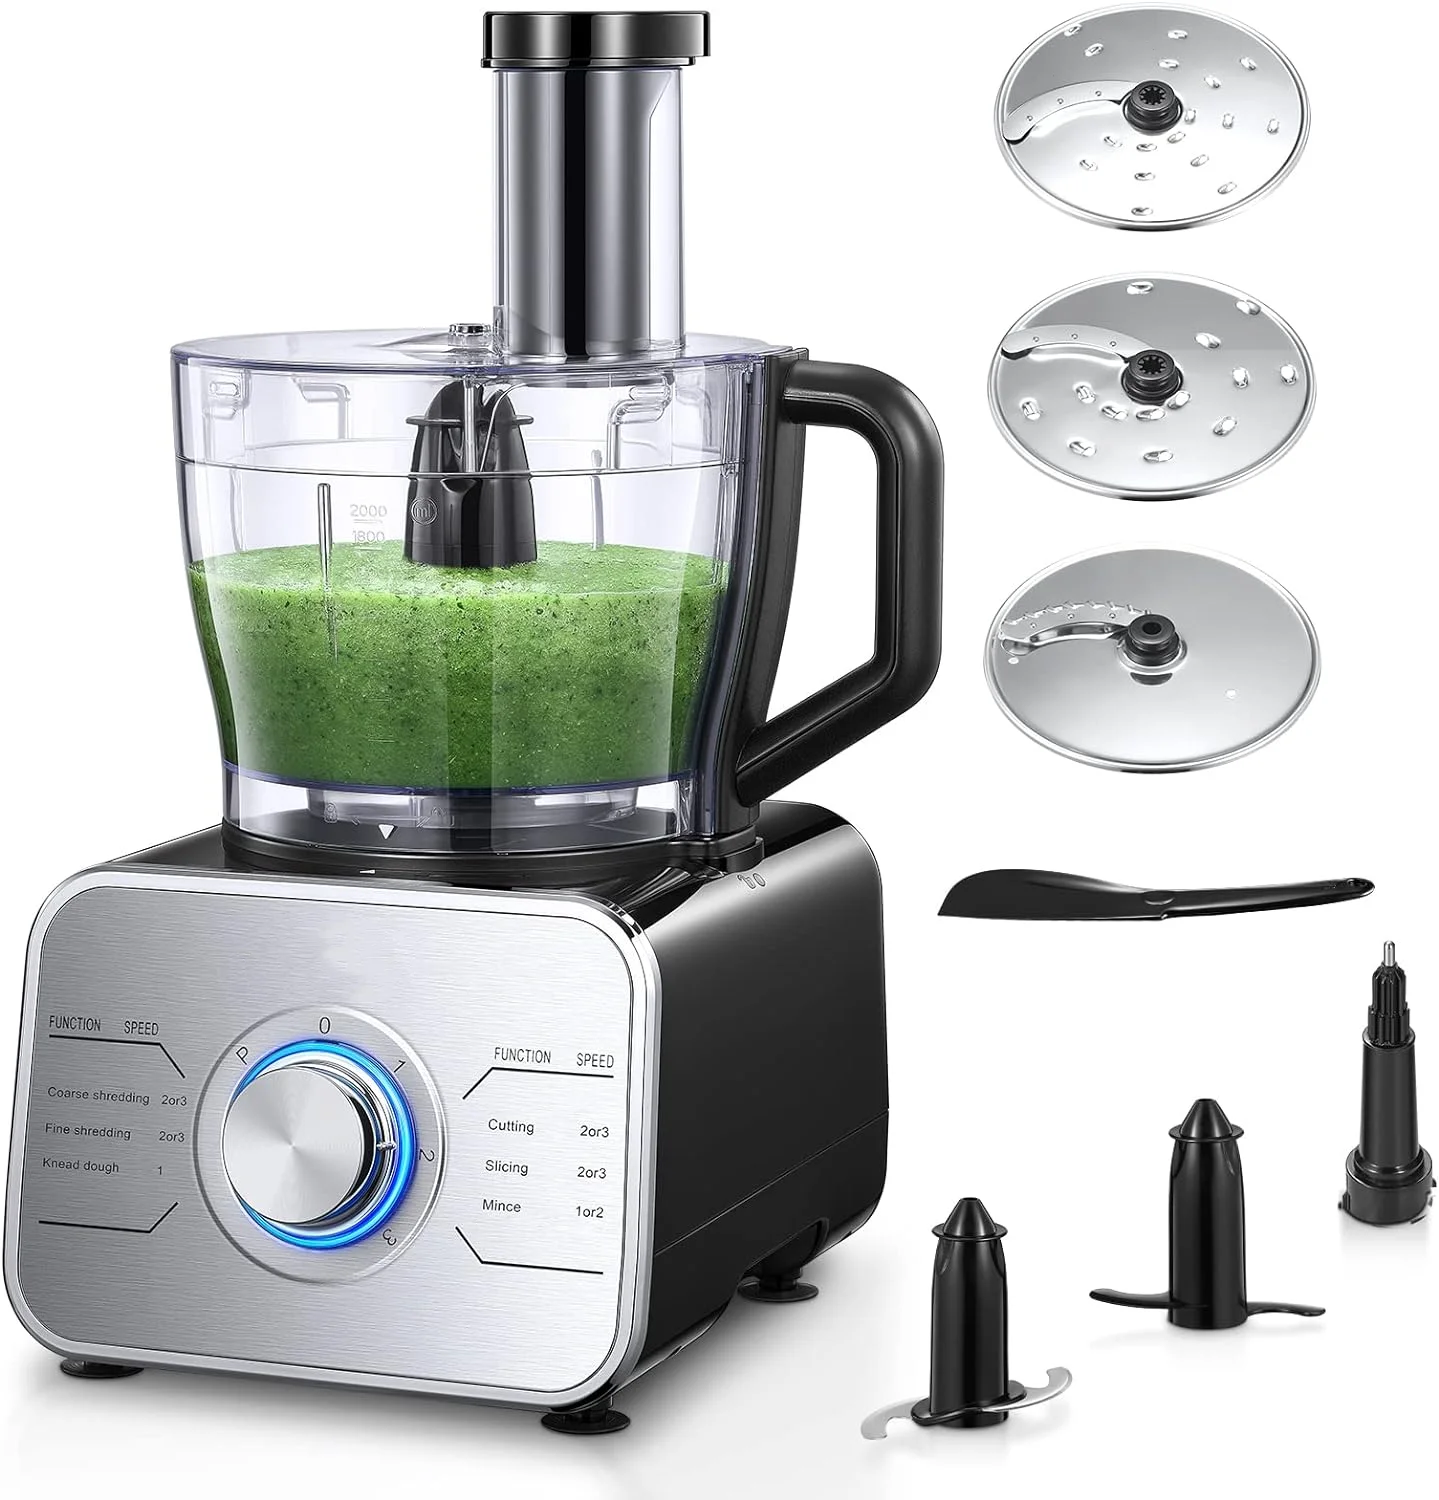 

Processor 12-Cup Vegetable Chopper with 3 Speeds Setting and LED light, Simple Operation for Dicing, Slicing, Shredding, Mincing